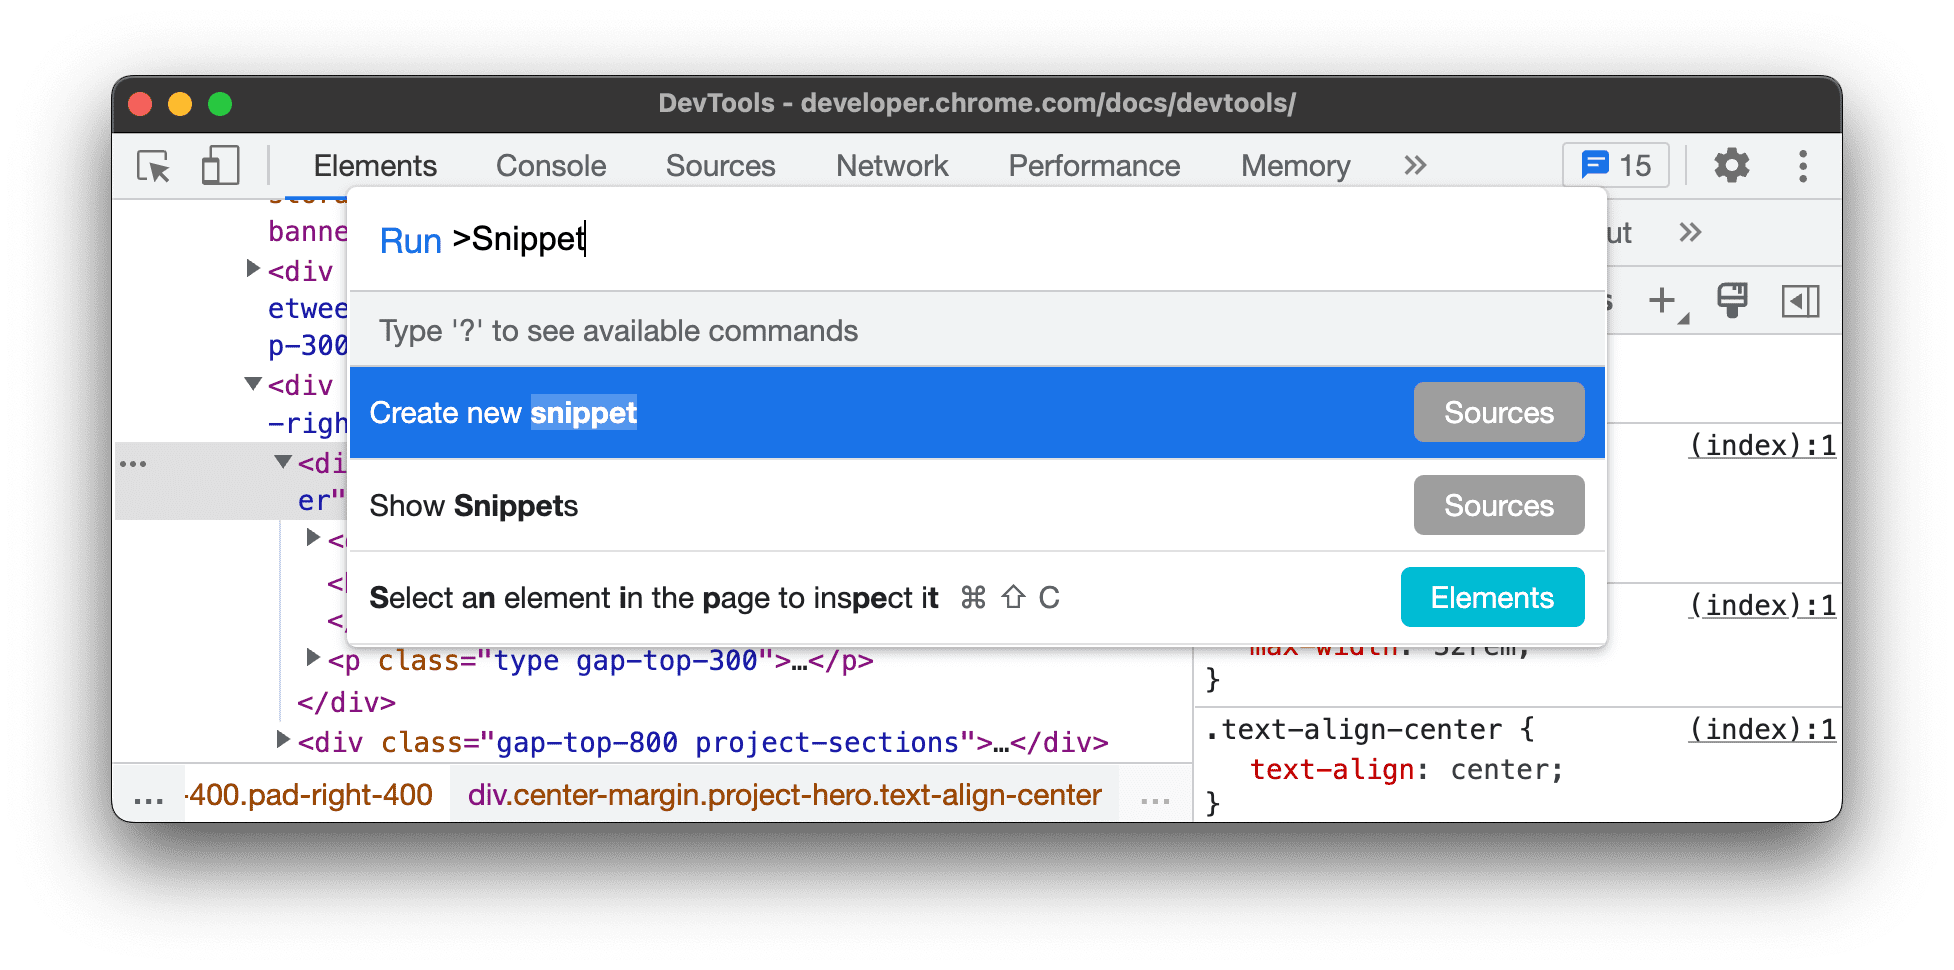 Selecting Create new snippet from the Command Menu.